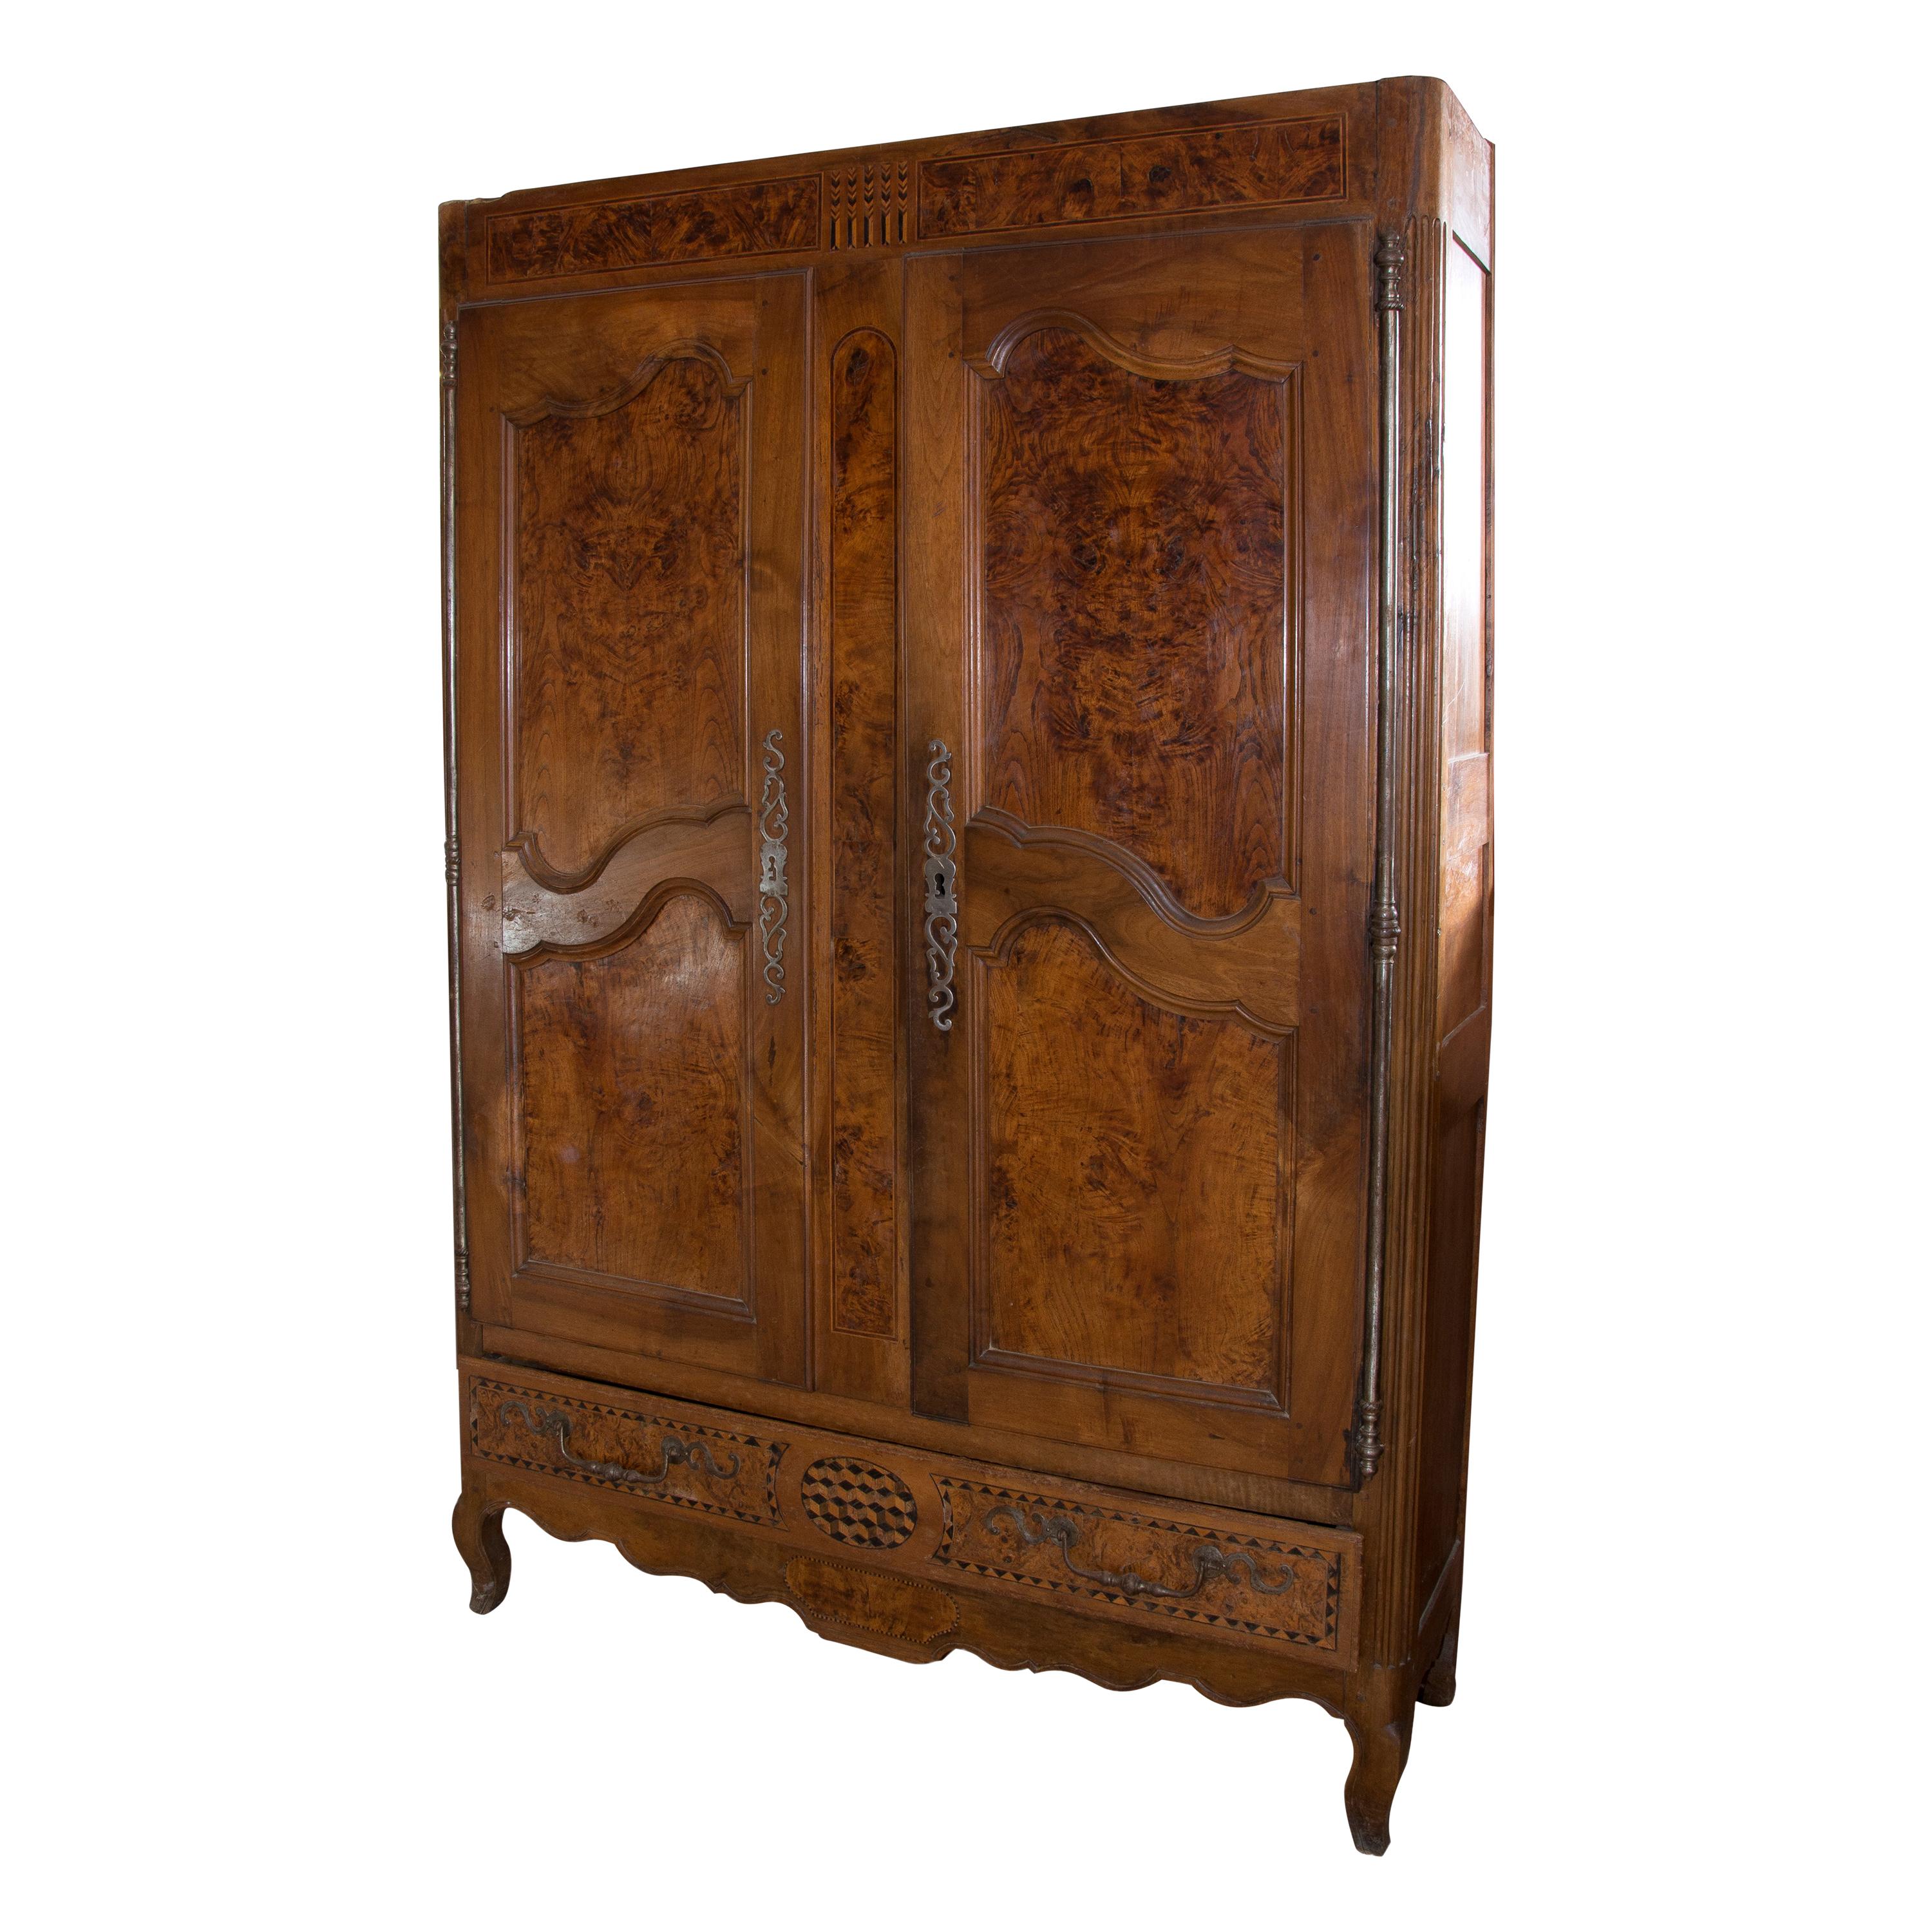 Provenzal Style Cupboard or Wardrobe, Walnut Wood and Root, 18thc. Lacks Moulding